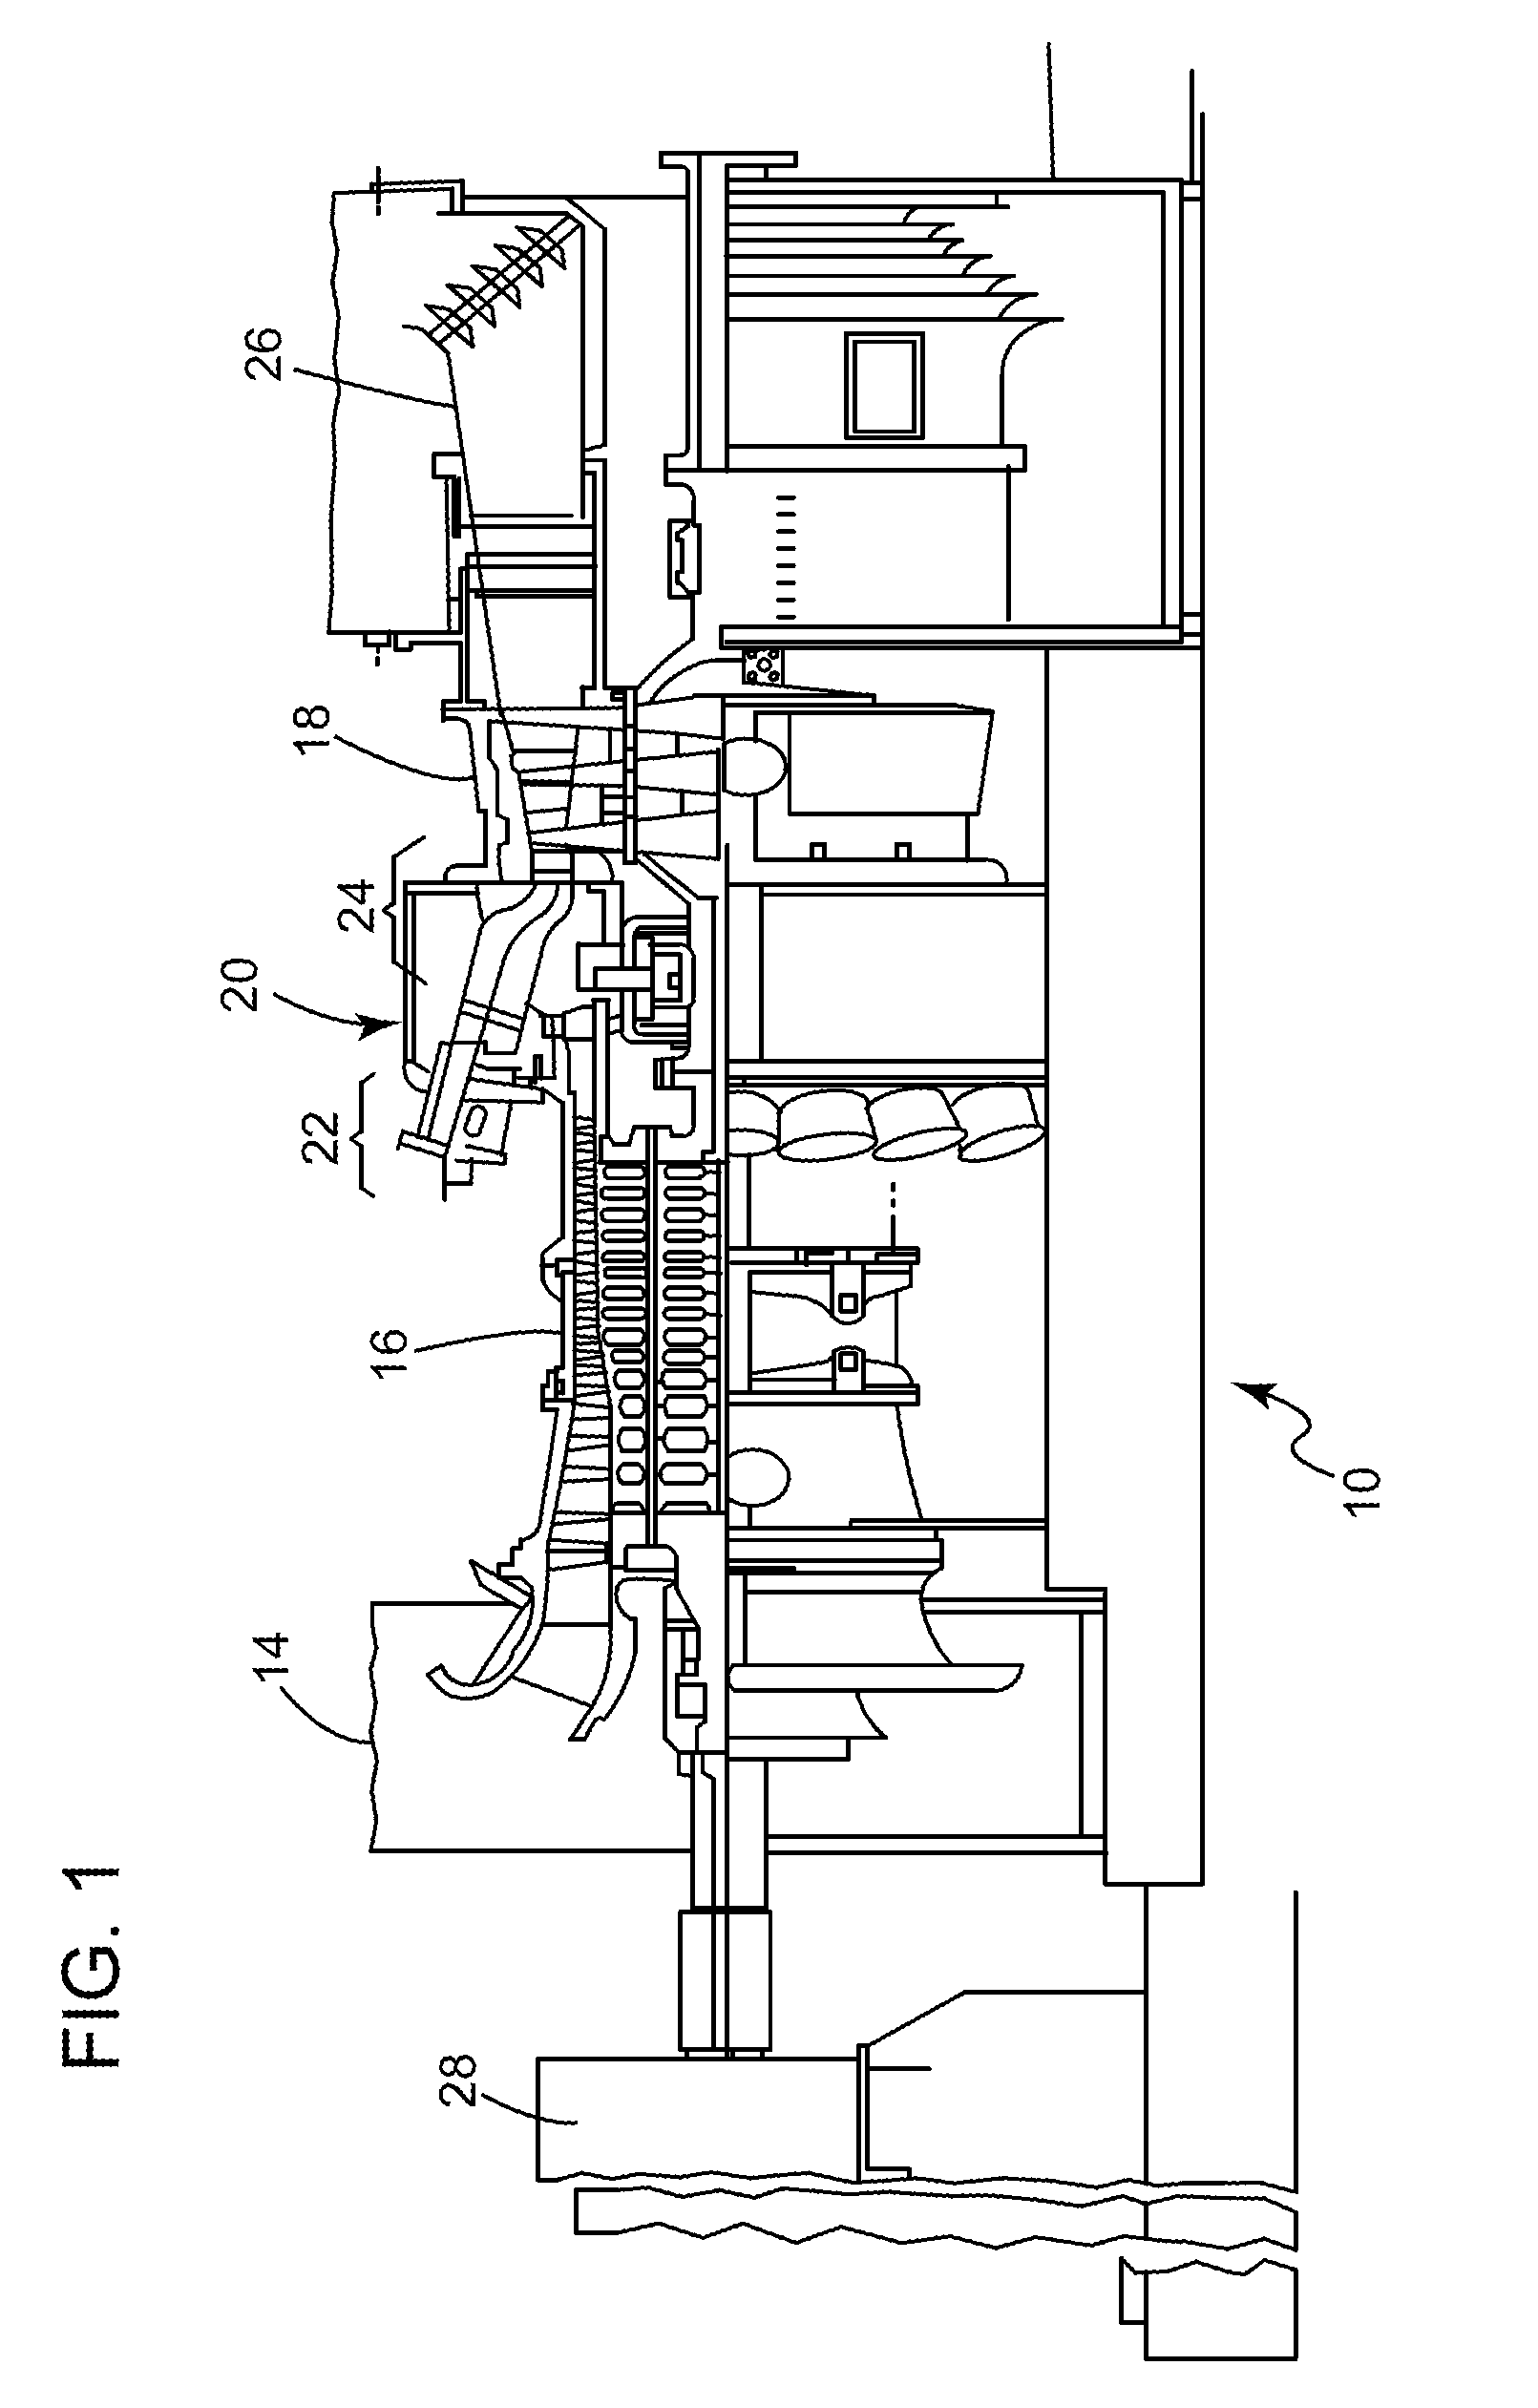 Method and system for reducing the level of emissions generated by a system